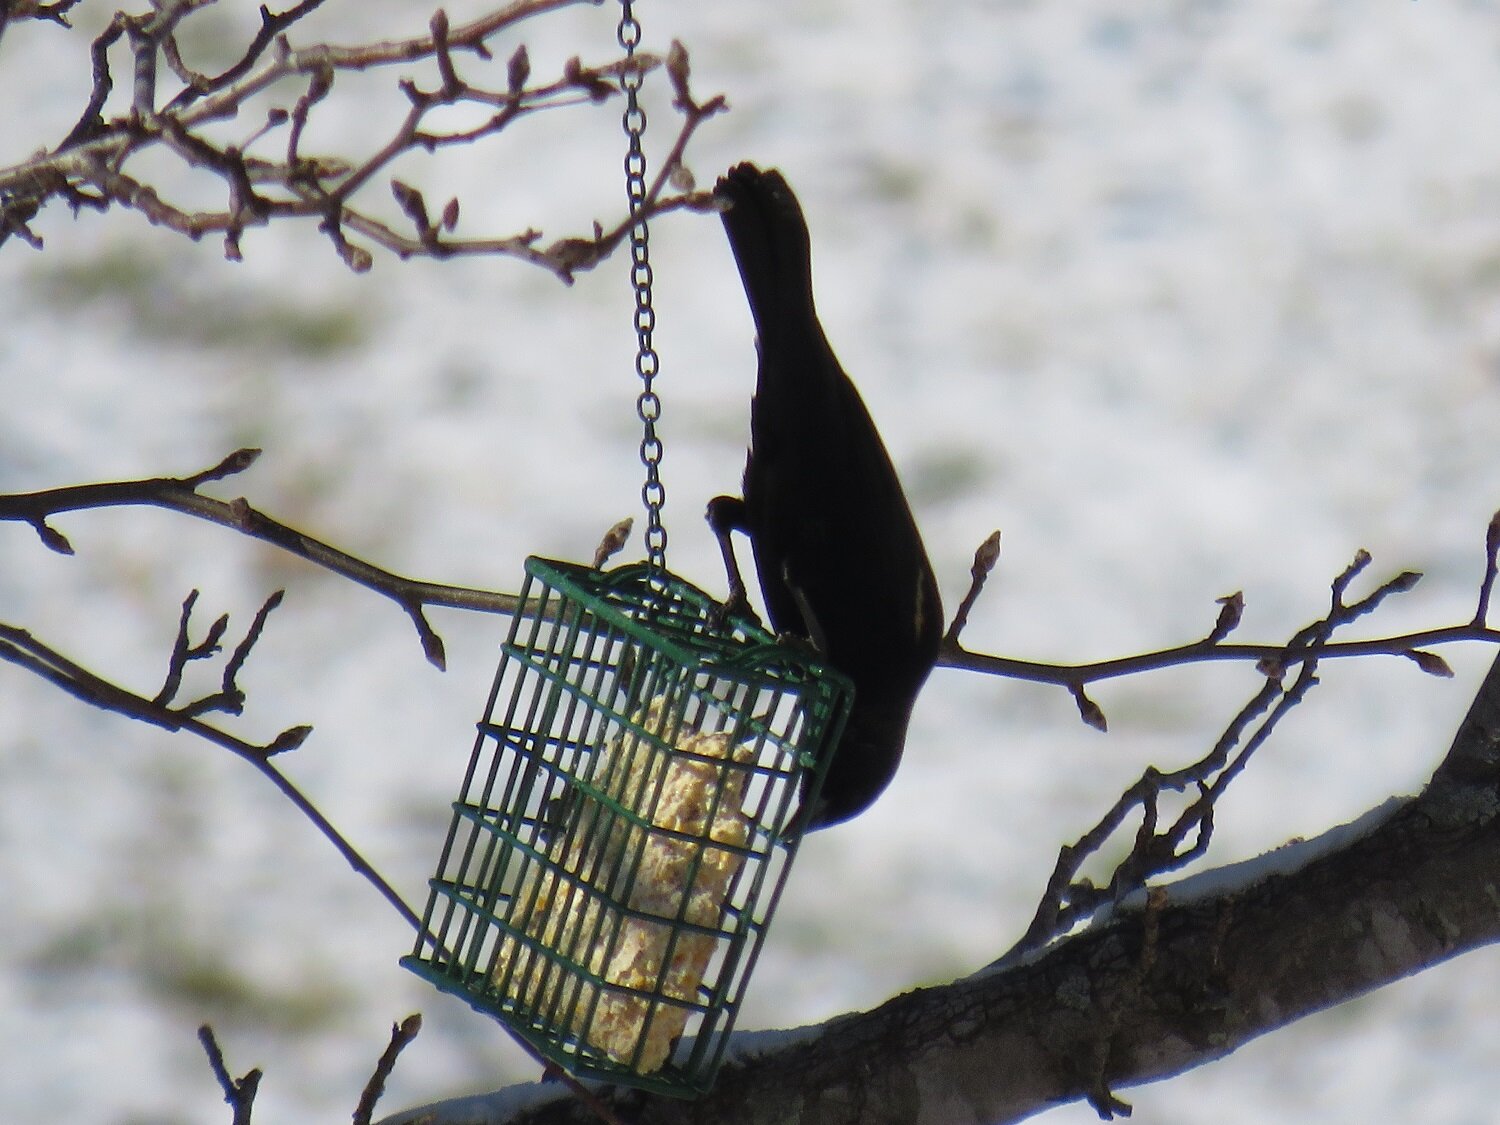  Some red-winged blackbirds really enjoyed our suet feeder 